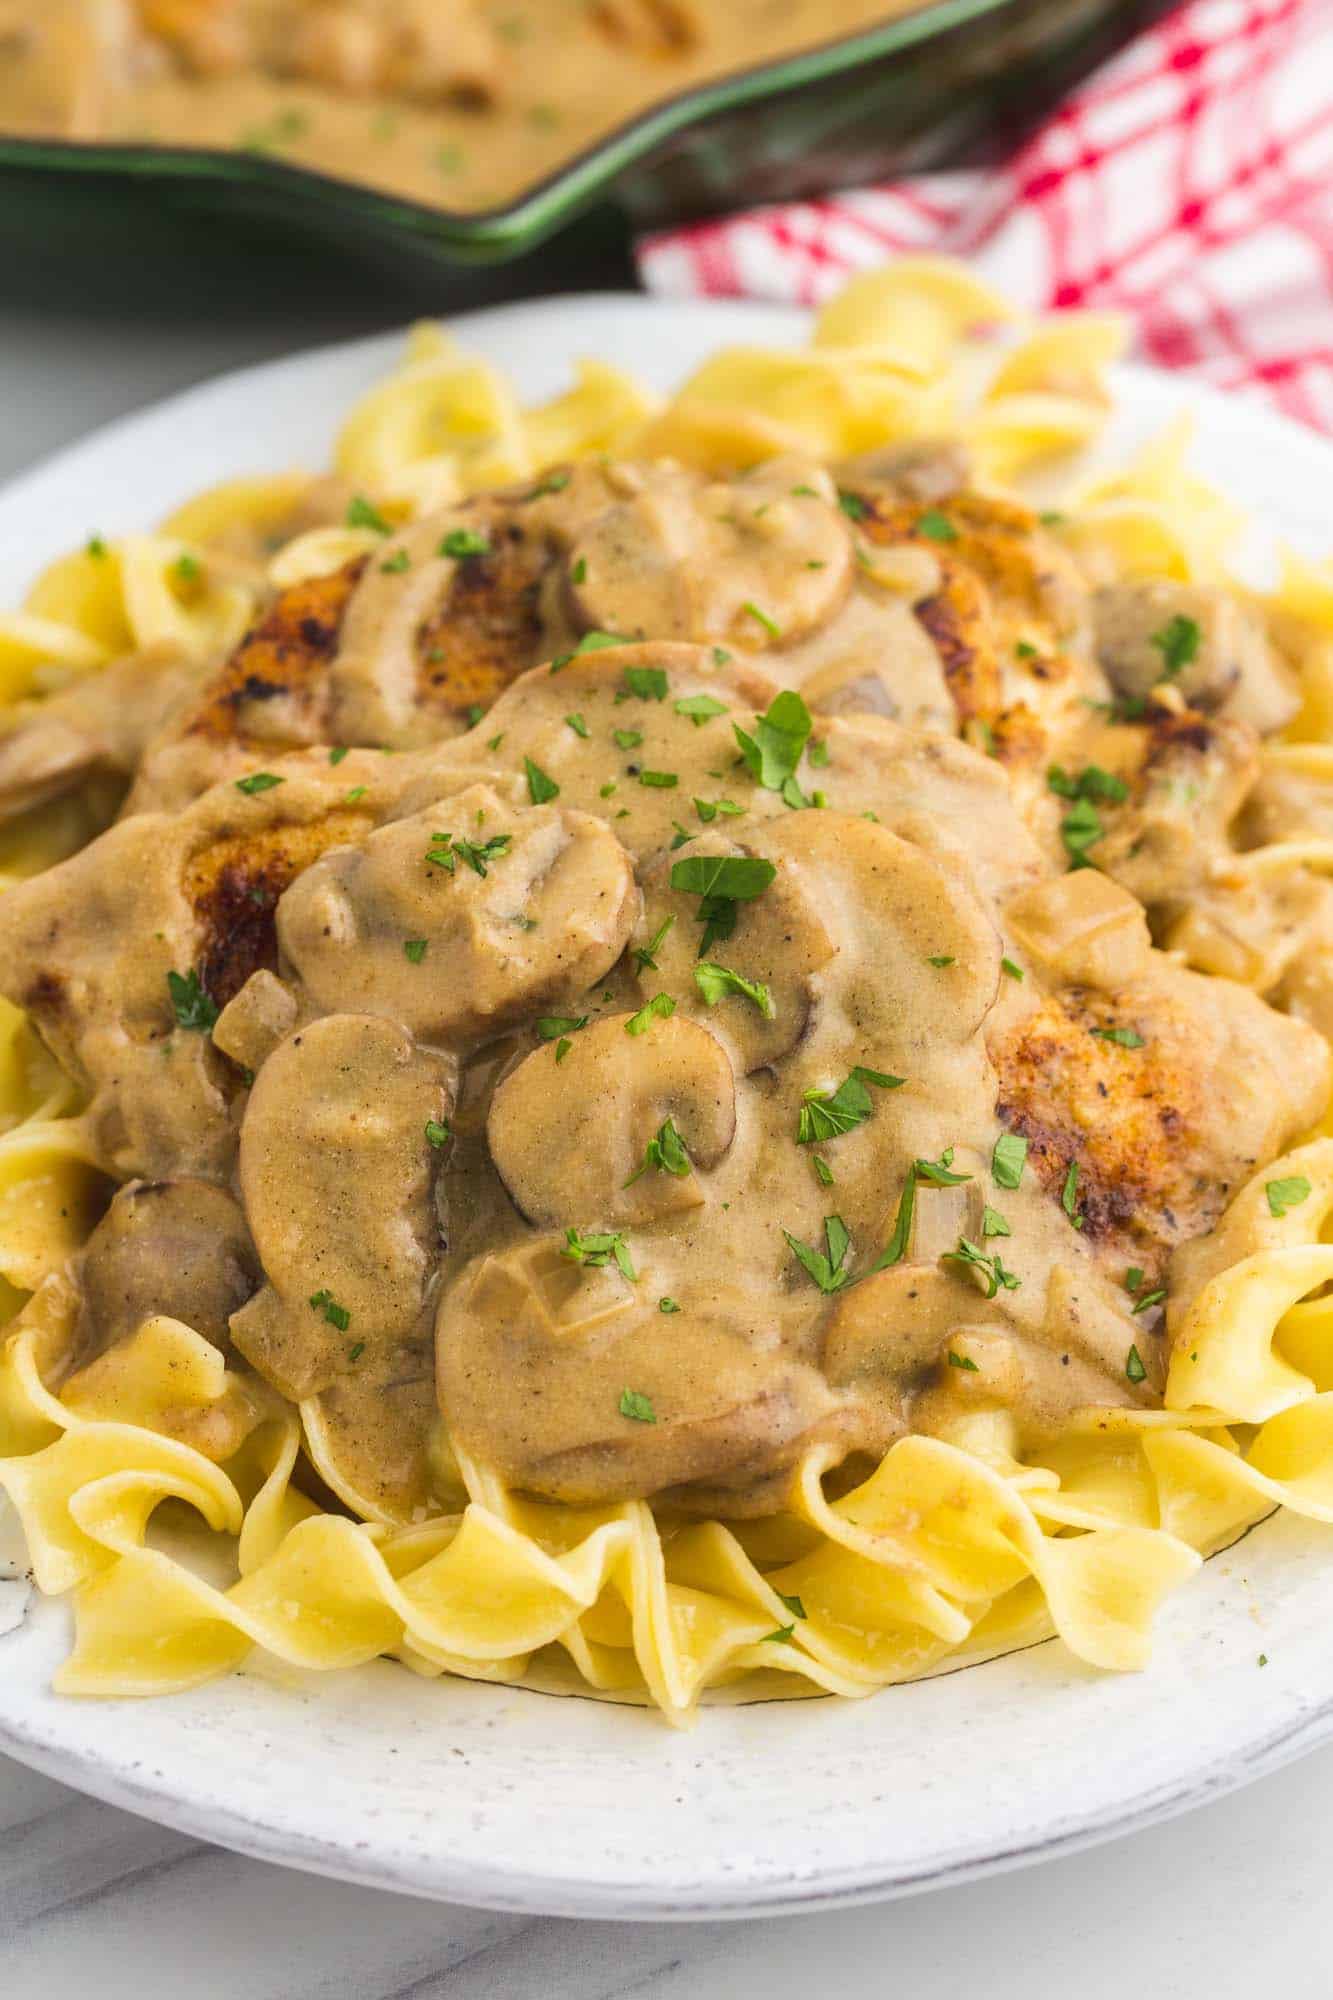 An angle shot of chicken stroganoff served over noodles, plated.